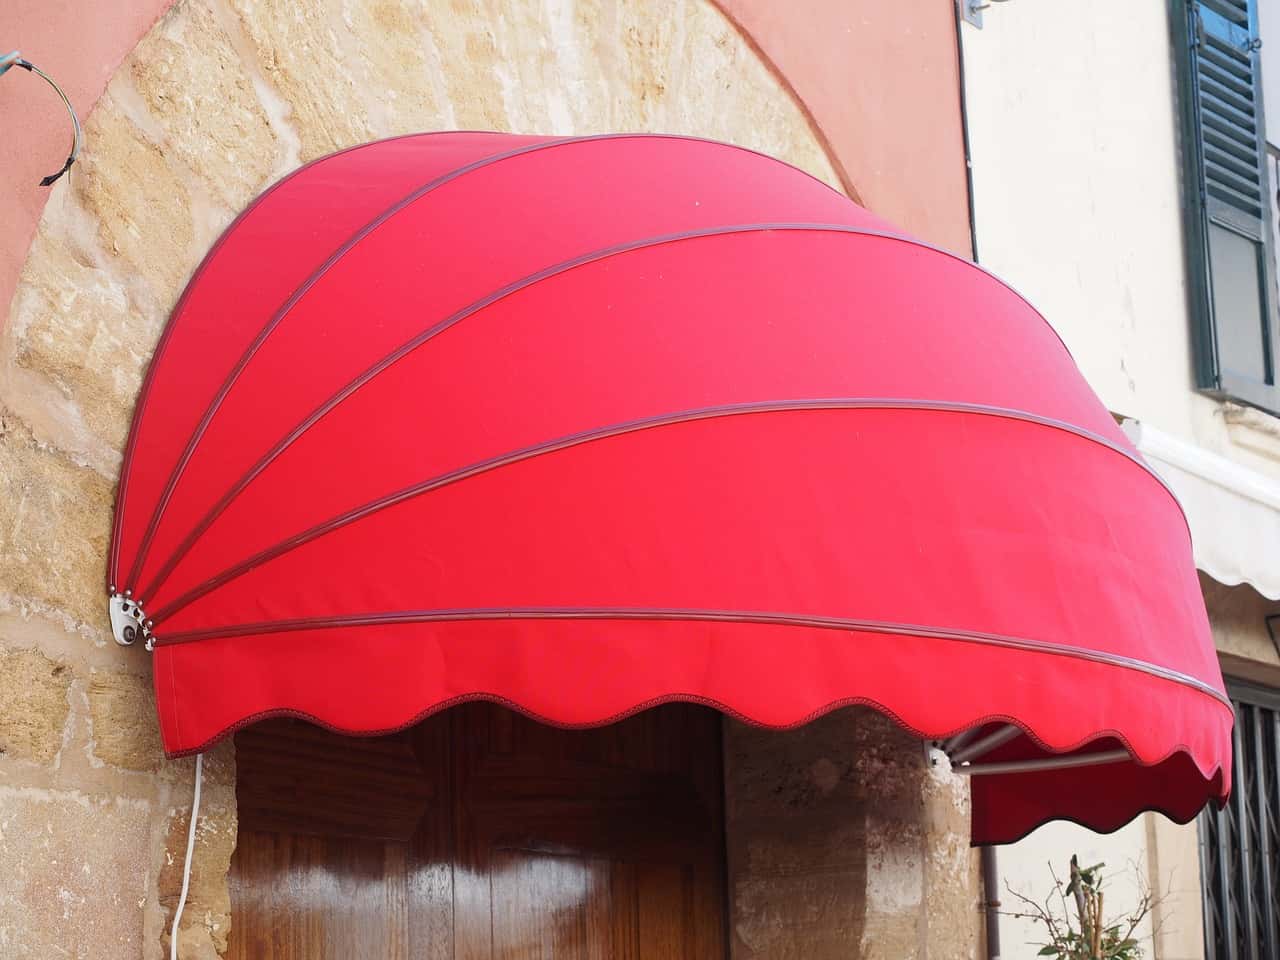 the half-domed canopy 